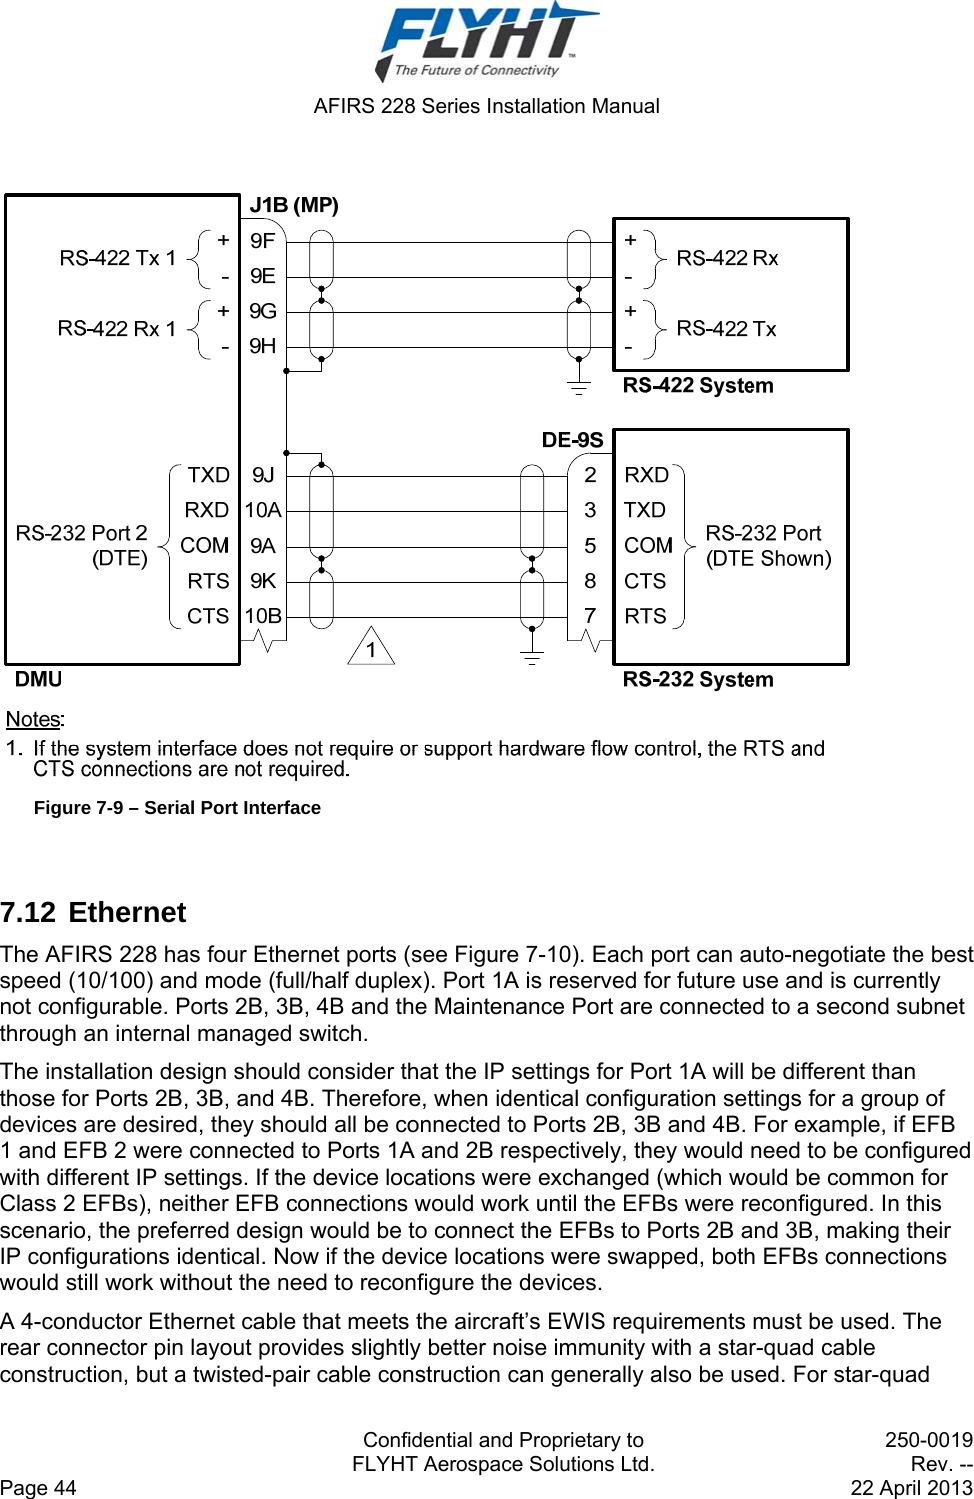  AFIRS 228 Series Installation Manual   Confidential and Proprietary to  250-0019   FLYHT Aerospace Solutions Ltd.  Rev. -- Page 44    22 April 2013   Figure 7-9 – Serial Port Interface  7.12 Ethernet The AFIRS 228 has four Ethernet ports (see Figure 7-10). Each port can auto-negotiate the best speed (10/100) and mode (full/half duplex). Port 1A is reserved for future use and is currently not configurable. Ports 2B, 3B, 4B and the Maintenance Port are connected to a second subnet through an internal managed switch. The installation design should consider that the IP settings for Port 1A will be different than those for Ports 2B, 3B, and 4B. Therefore, when identical configuration settings for a group of devices are desired, they should all be connected to Ports 2B, 3B and 4B. For example, if EFB 1 and EFB 2 were connected to Ports 1A and 2B respectively, they would need to be configured with different IP settings. If the device locations were exchanged (which would be common for Class 2 EFBs), neither EFB connections would work until the EFBs were reconfigured. In this scenario, the preferred design would be to connect the EFBs to Ports 2B and 3B, making their IP configurations identical. Now if the device locations were swapped, both EFBs connections would still work without the need to reconfigure the devices. A 4-conductor Ethernet cable that meets the aircraft’s EWIS requirements must be used. The rear connector pin layout provides slightly better noise immunity with a star-quad cable construction, but a twisted-pair cable construction can generally also be used. For star-quad 